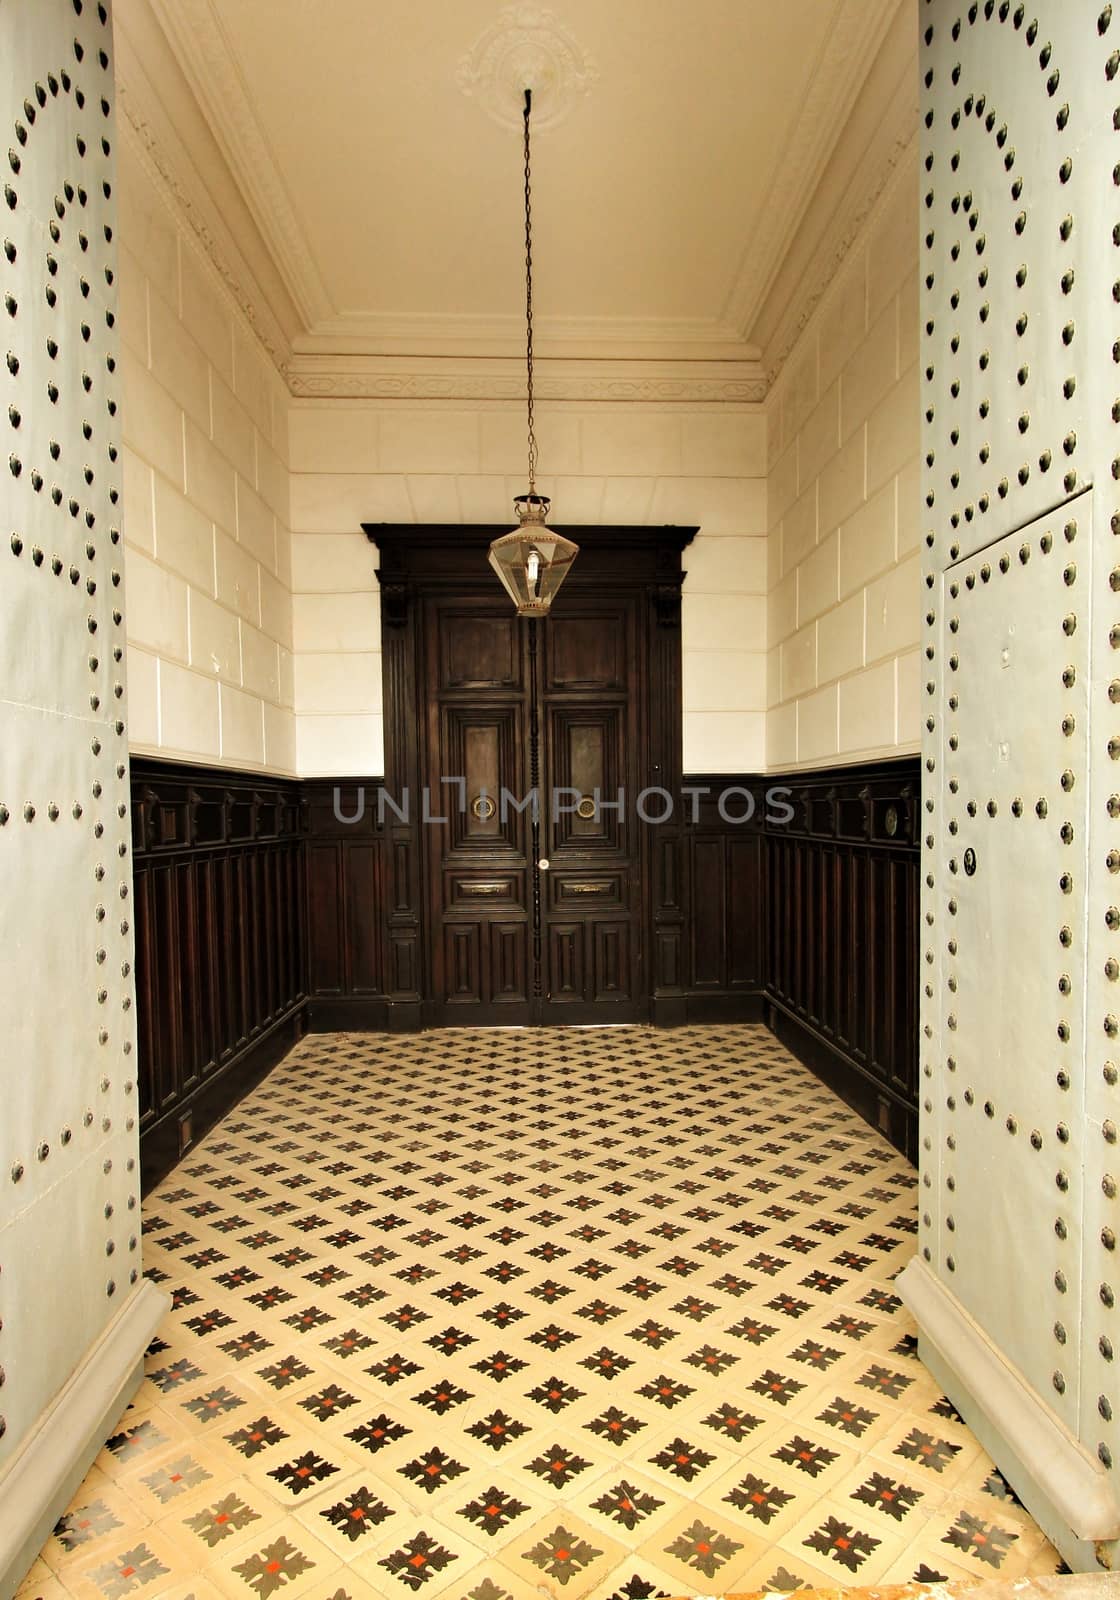 Entrance of majestic modernist style house in Alicante. Beautiful door with forged metal details and typical tiled floor